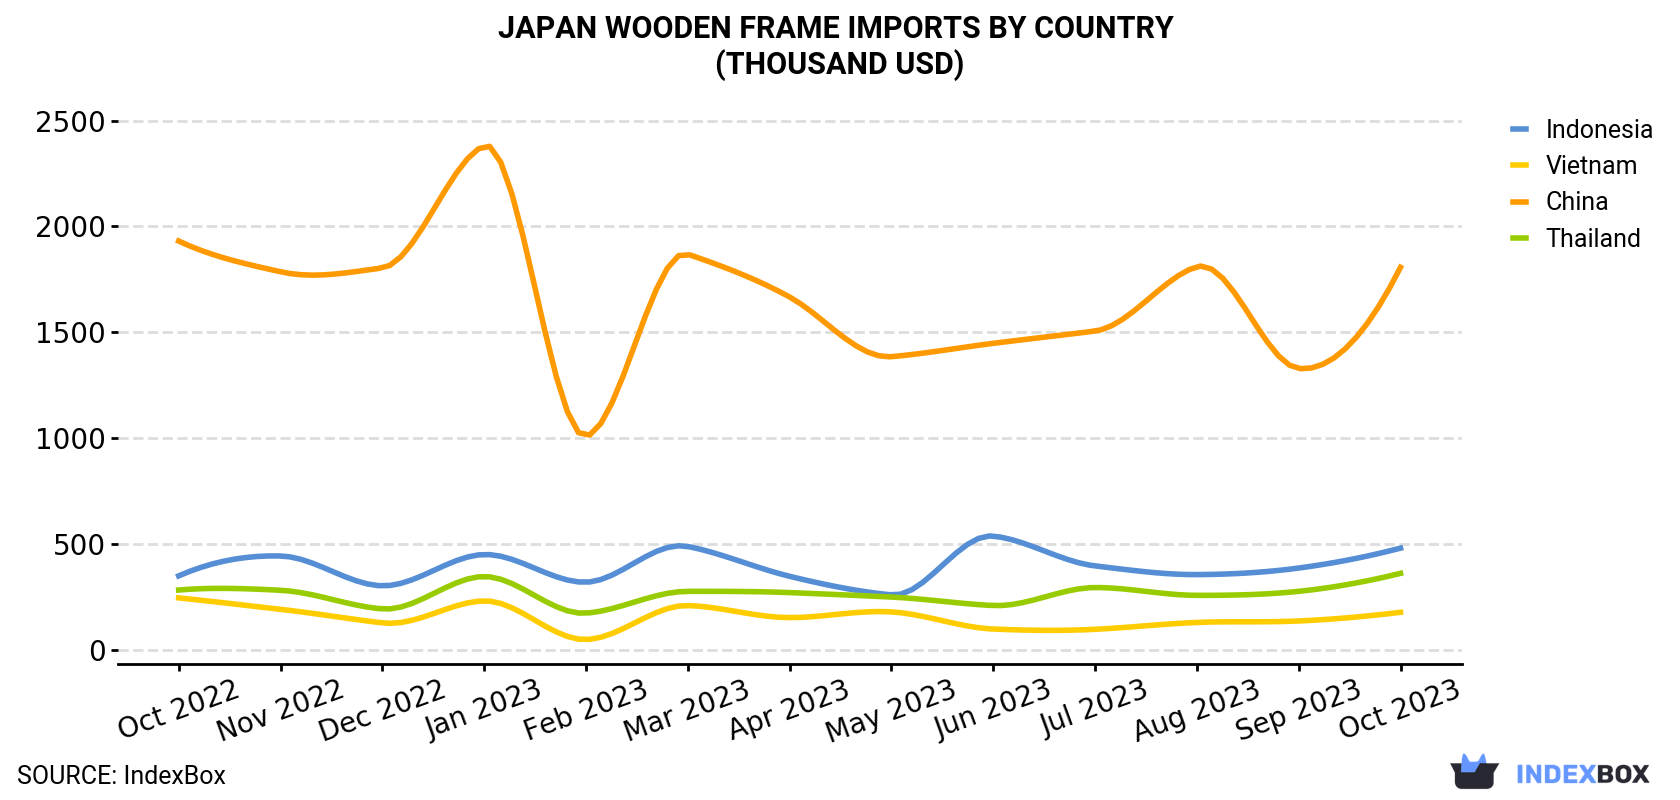 Japan Wooden Frame Imports By Country (Thousand USD)